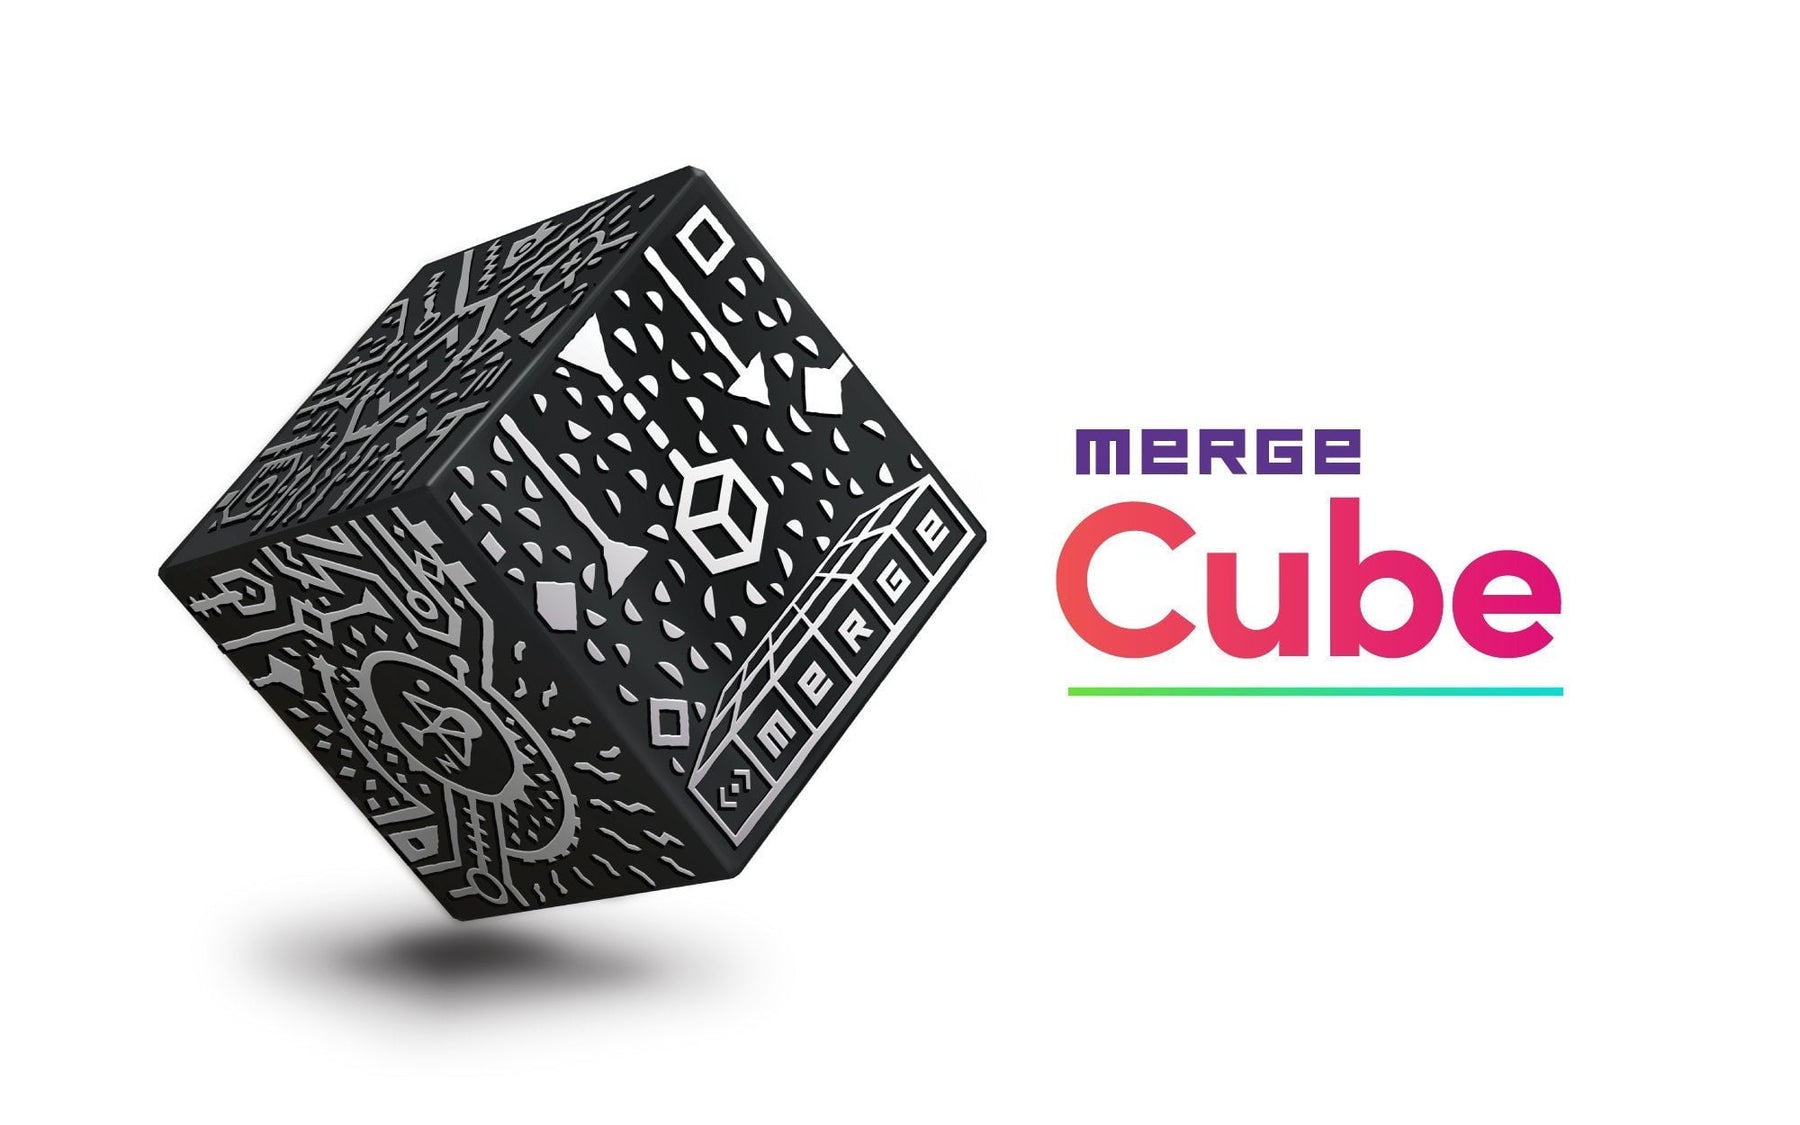  Merge Cube - Augmented & Virtual Reality Science & STEM Toy -  Educational Tool - Hands-on Digital Teaching Aids - Science Simulations -  Home School, Remote & in Classroom Learning 